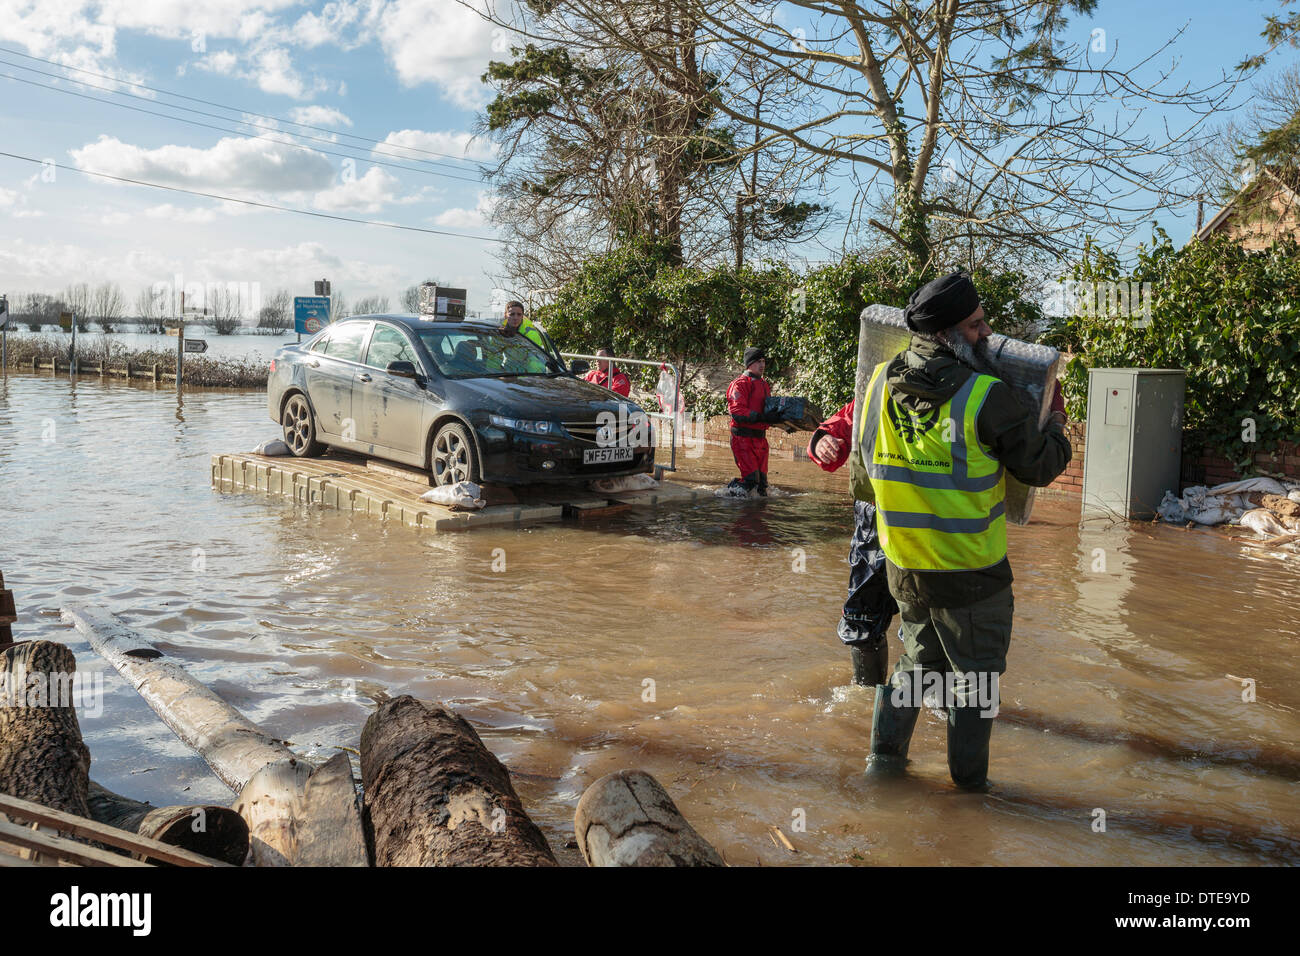 Burrowbridge, UK. 16th Feb, 2014. Volunteers rescue a Honda Accord during the heavy flooding on the Somerset Levels on February 16, 2014. The car was packed full of belongings and driven onto a pontoon used to transport vehicles and livestock and aid into the flooded community. A member of the Khalsa Aid organisation carries boxes to safety. The A361 is a major arterial route across the Somerset Levels and has just experienced the worst flooding in living history and has been underwater now for seven weeks. Credit:  Nick Cable/Alamy Live News Stock Photo